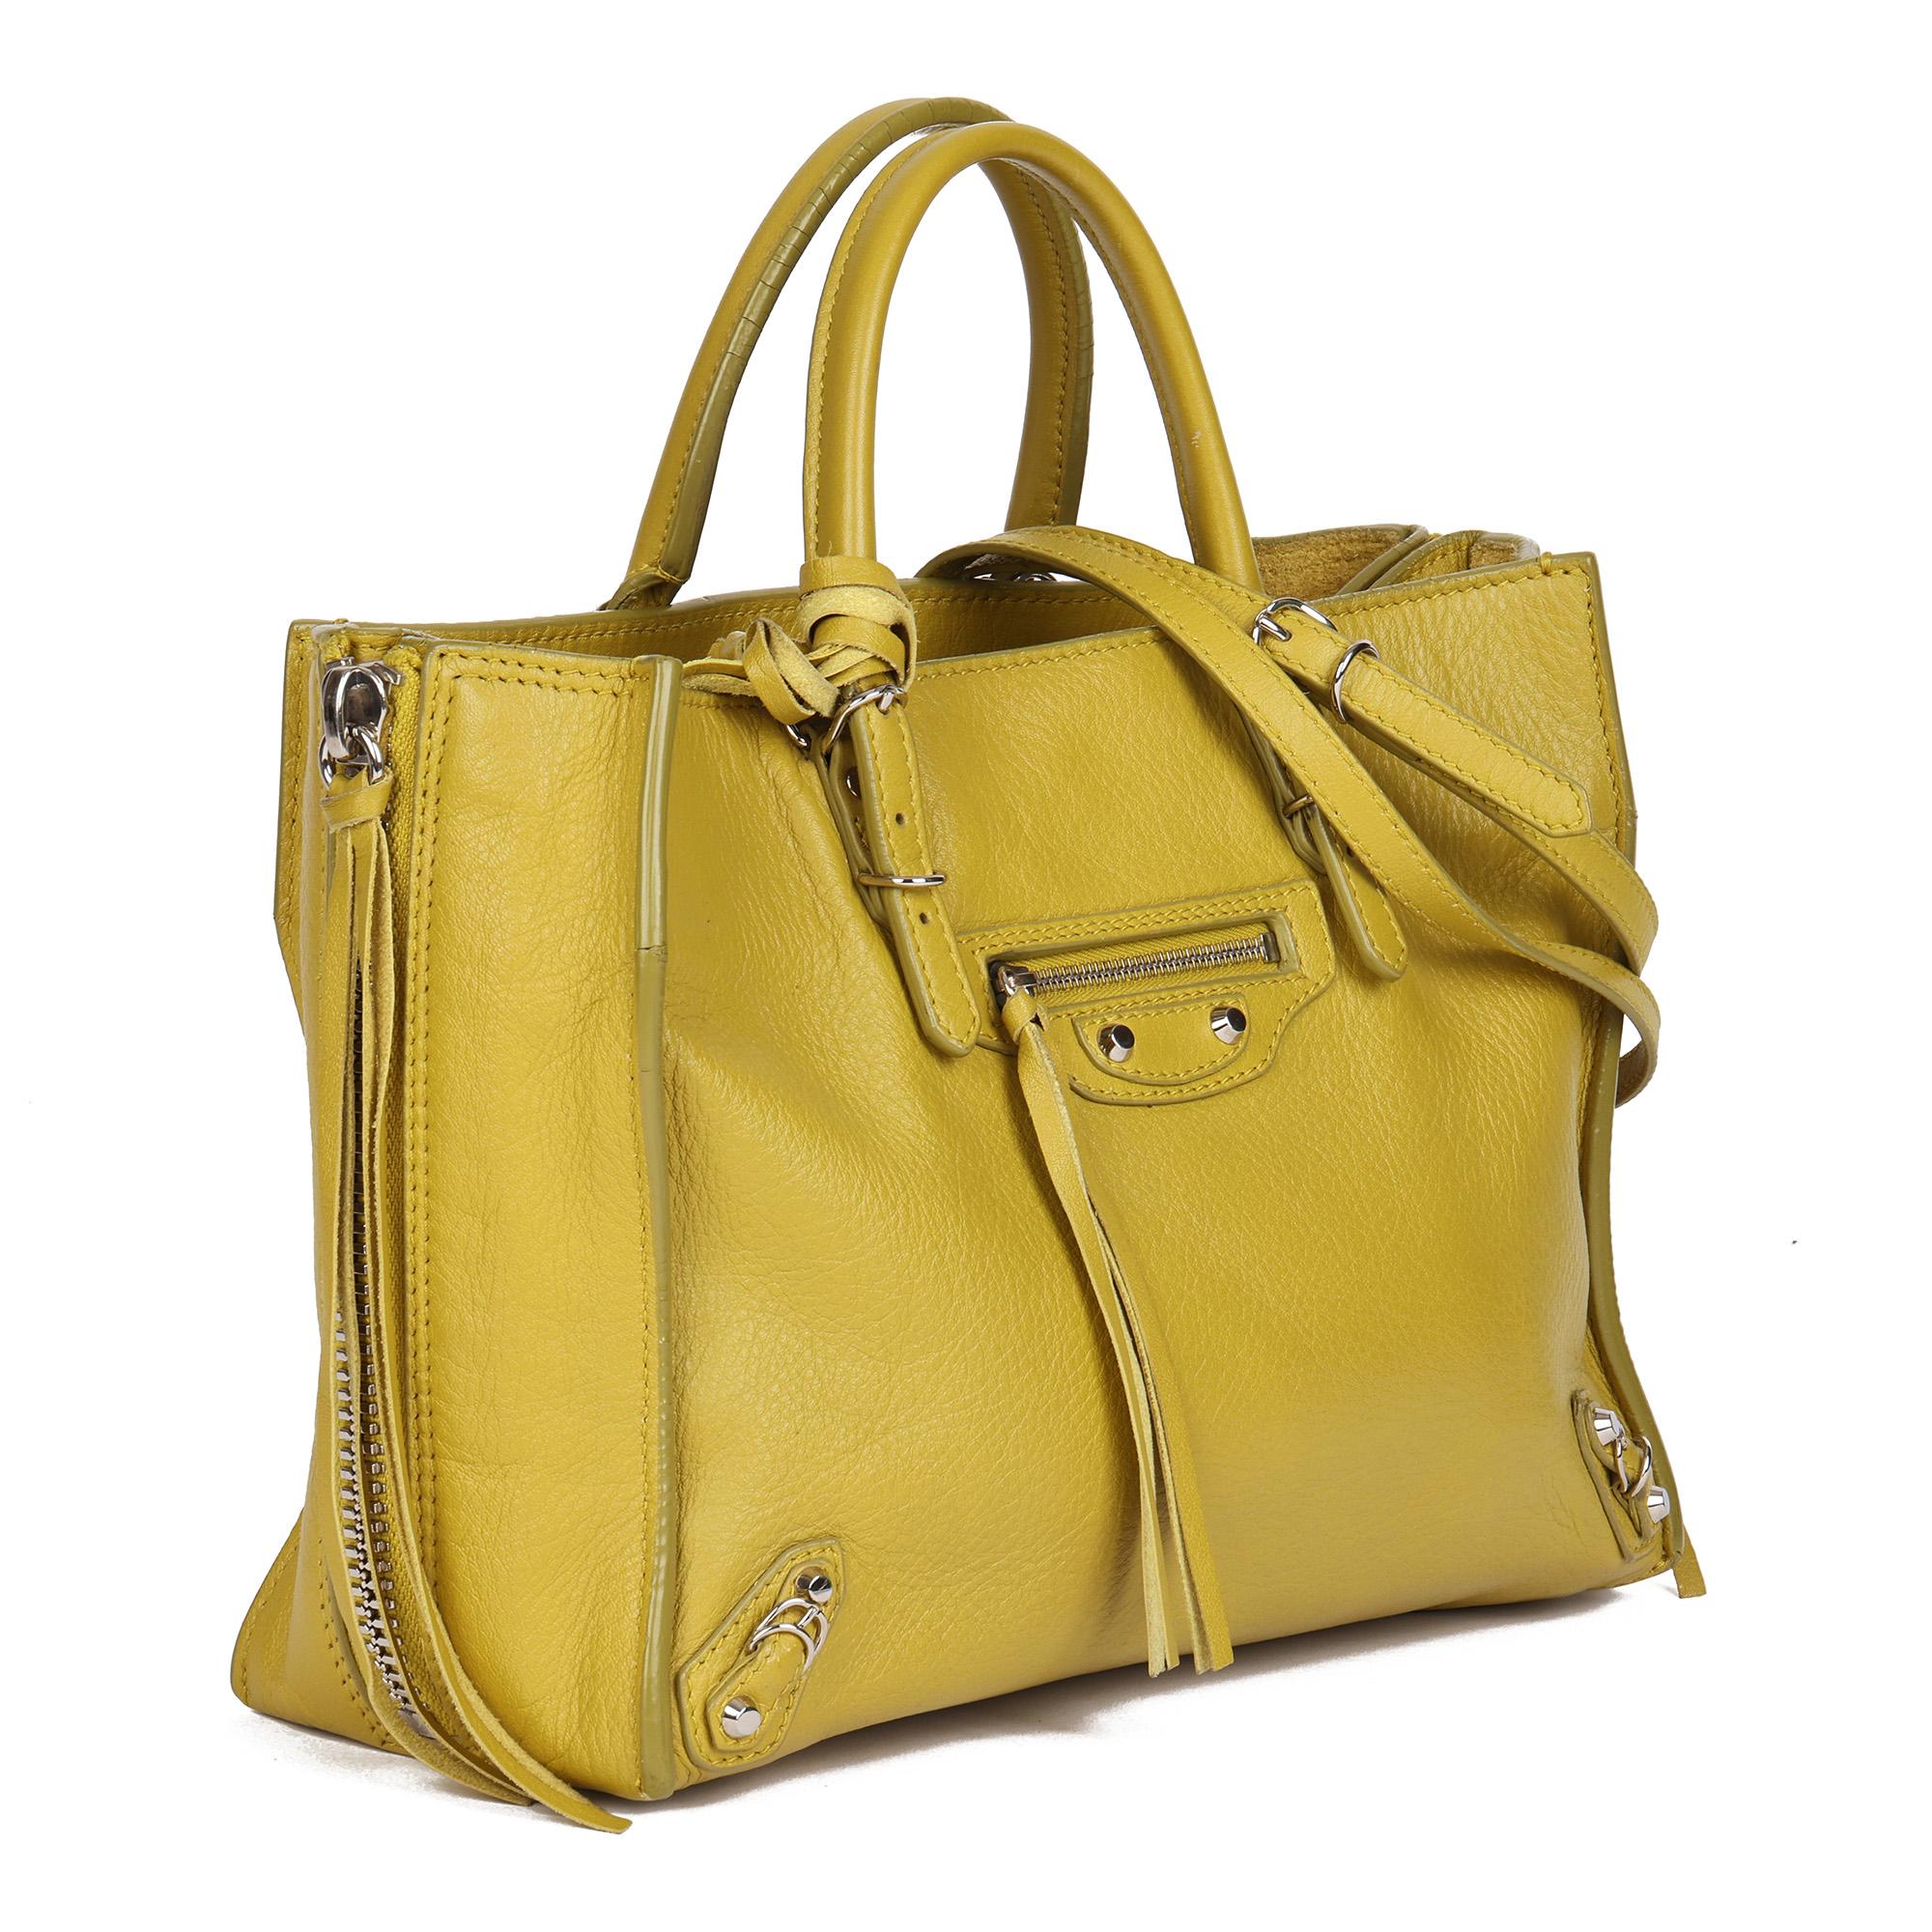 BALENCIAGA
Jaune Citronnade Goatskin Leather Papier Mini

Serial Number: 370926.7325.E.535269
Age (Circa): 2010
Accompanied By: Balenciaga Shoulder Strap, Detachable Mirror
Authenticity Details: Date Stamp (Made in Italy)
Gender: Ladies
Type: Tote,